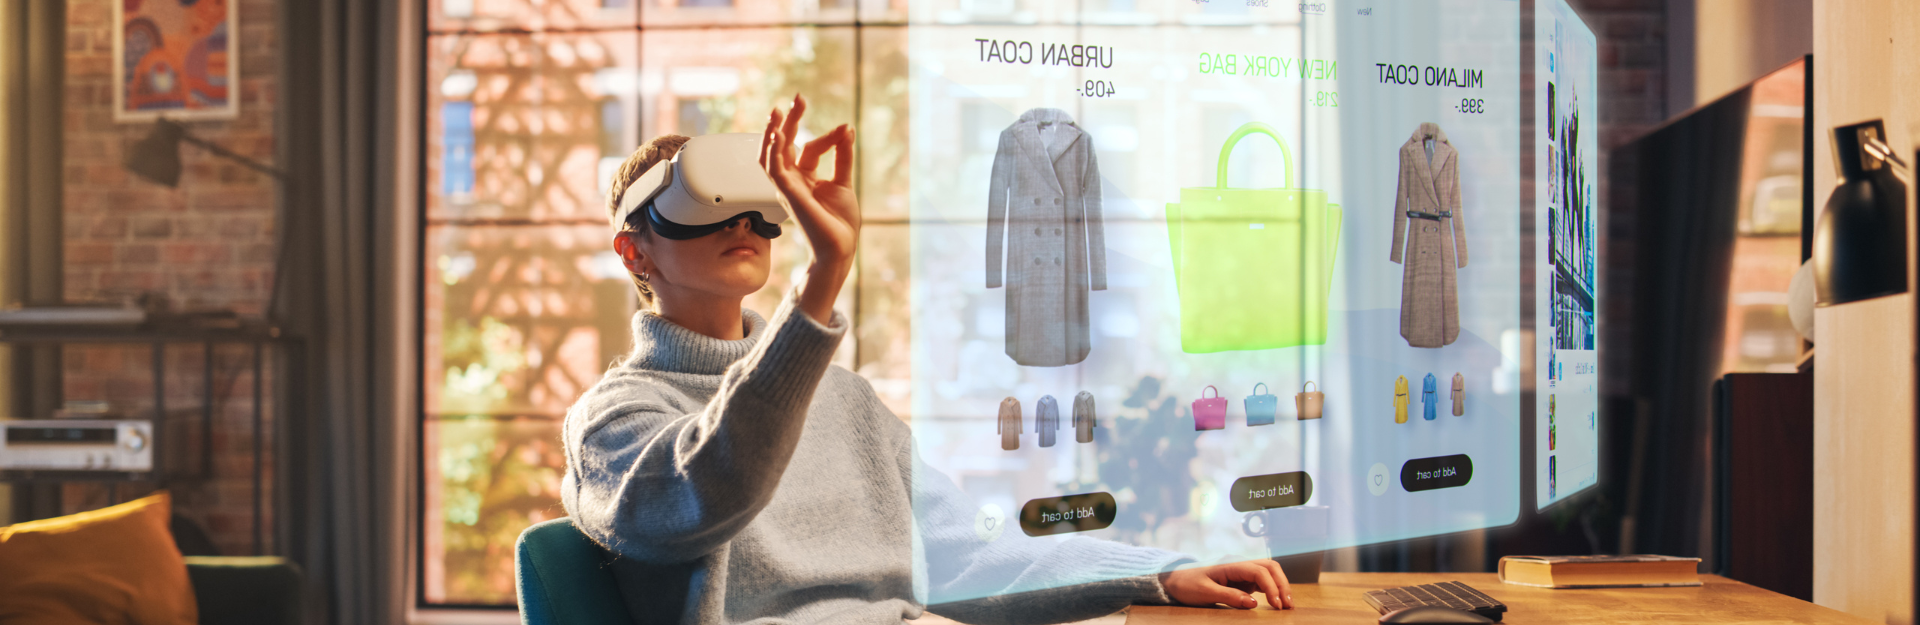 How AR Impacts Shopping in the Fashion and Retail Industry